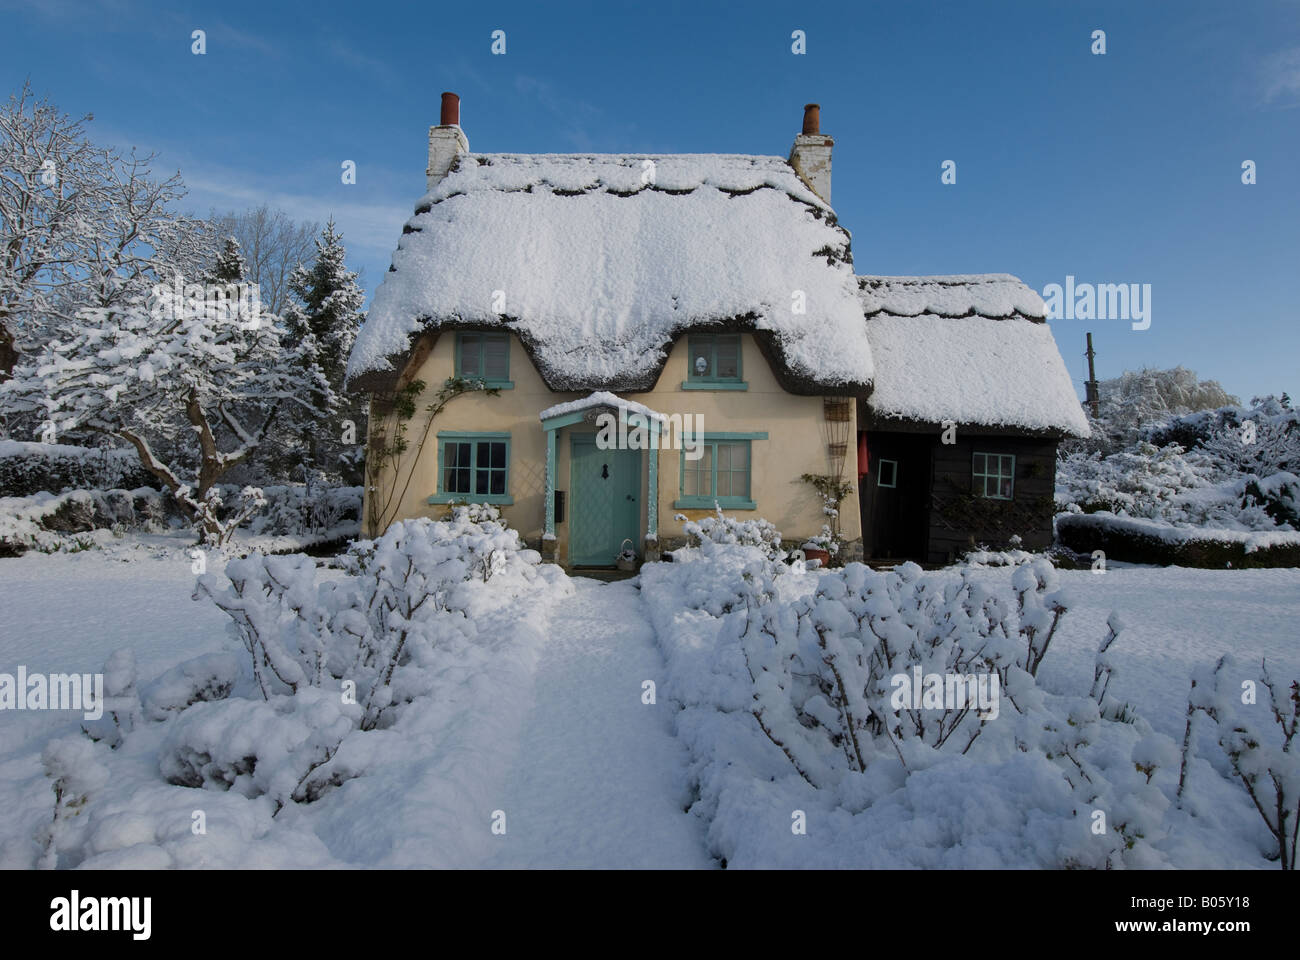 A thatched cottage on a sunny snowy day, Warwickshire, England, UK. Stock Photo